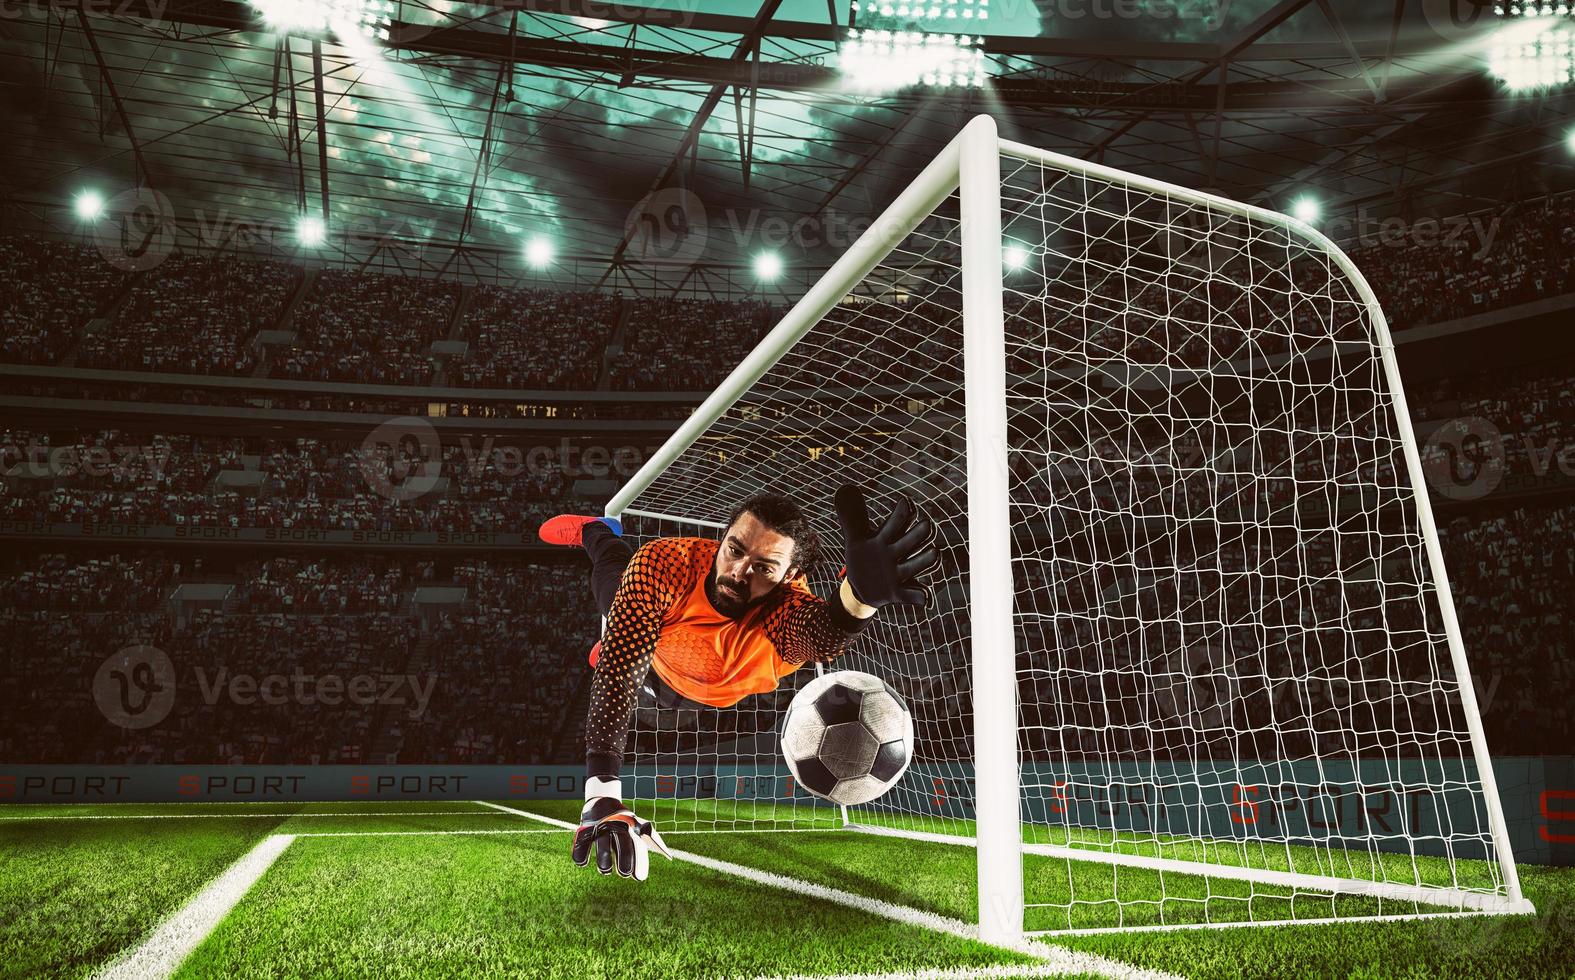 Goalkeeper in orange uniform catches the ball in the stadium during a football game photo